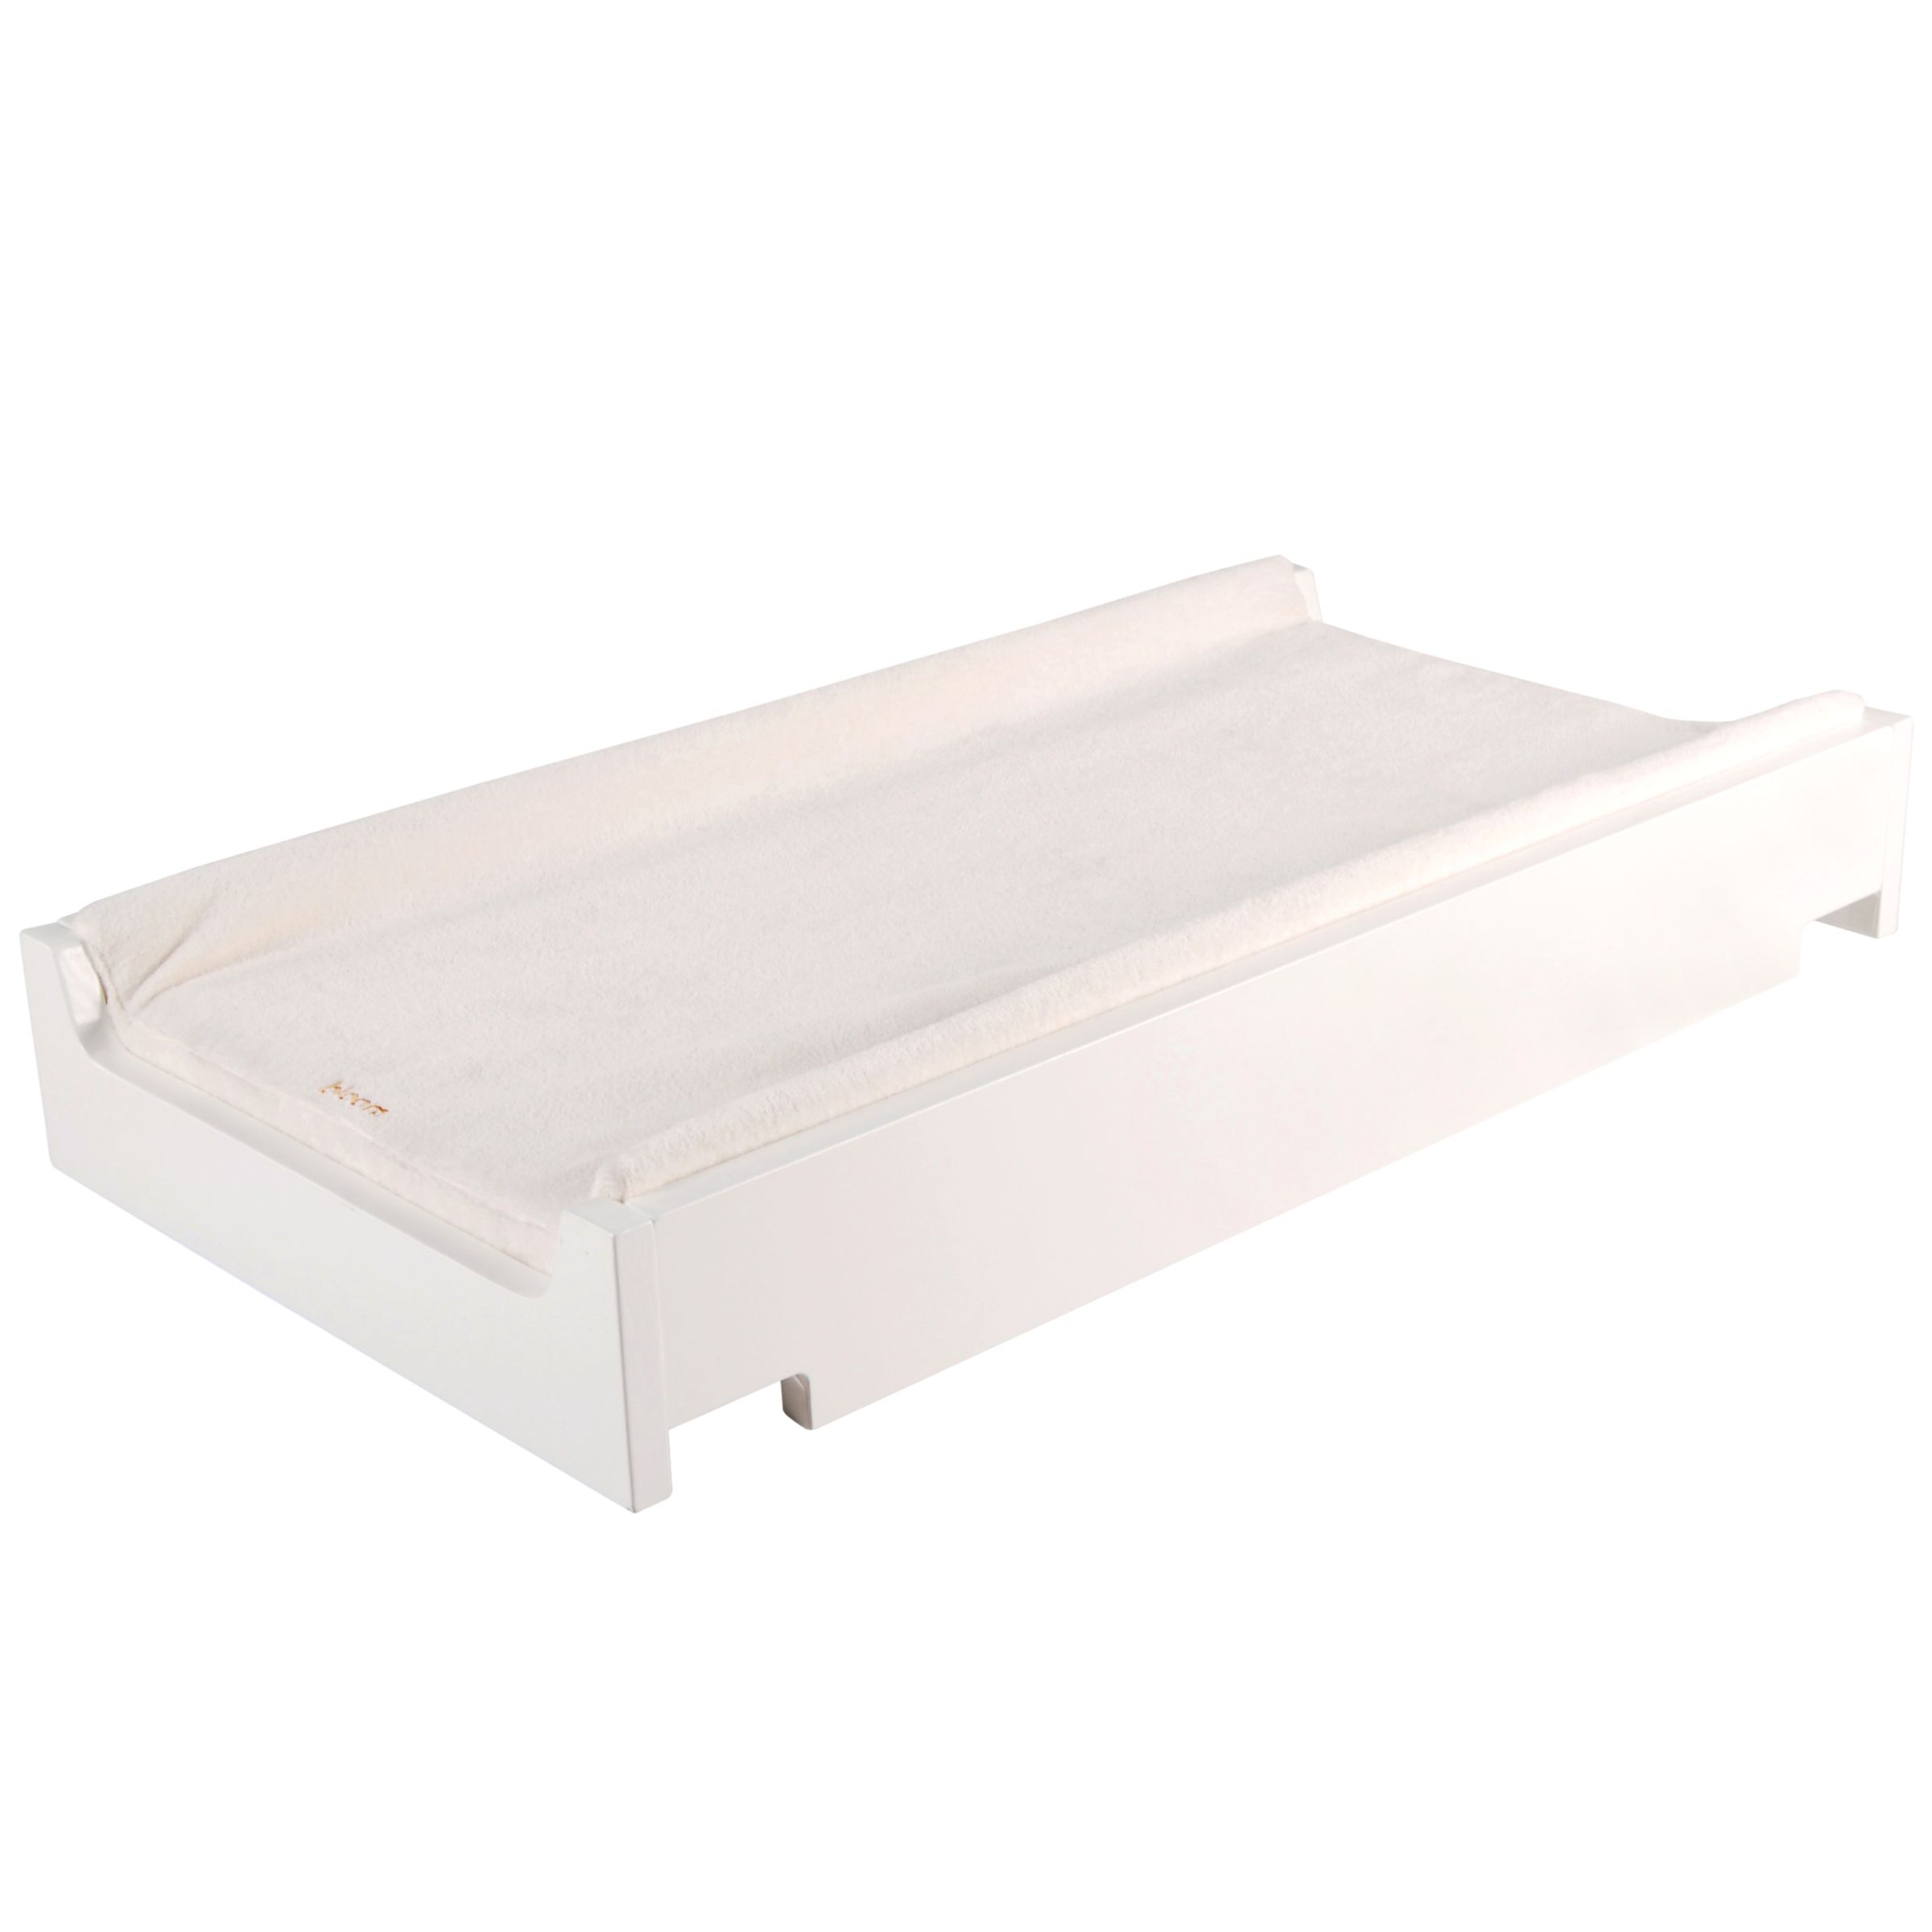 bloom Luxo Change Tray, Coconut White at John Lewis